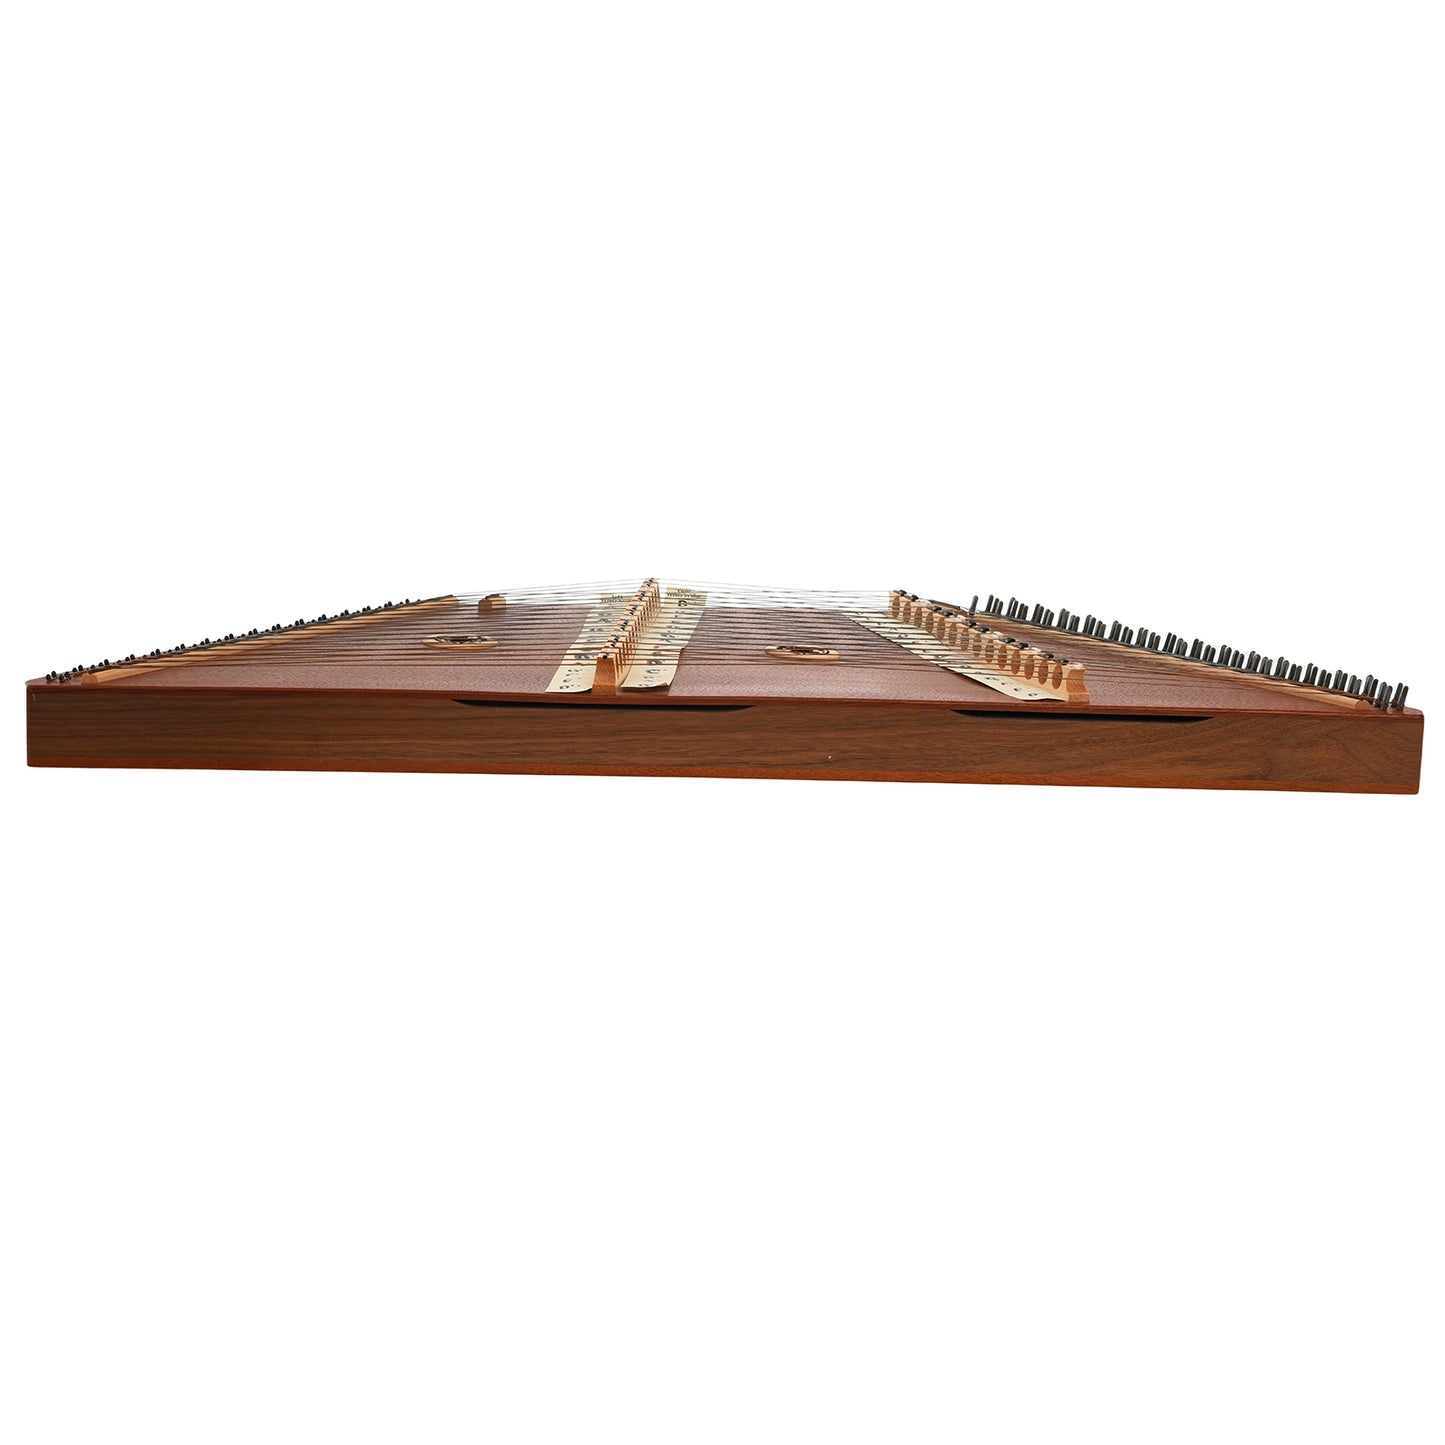 Flat view of Dusty String D-35 Hammered Dulcimer 